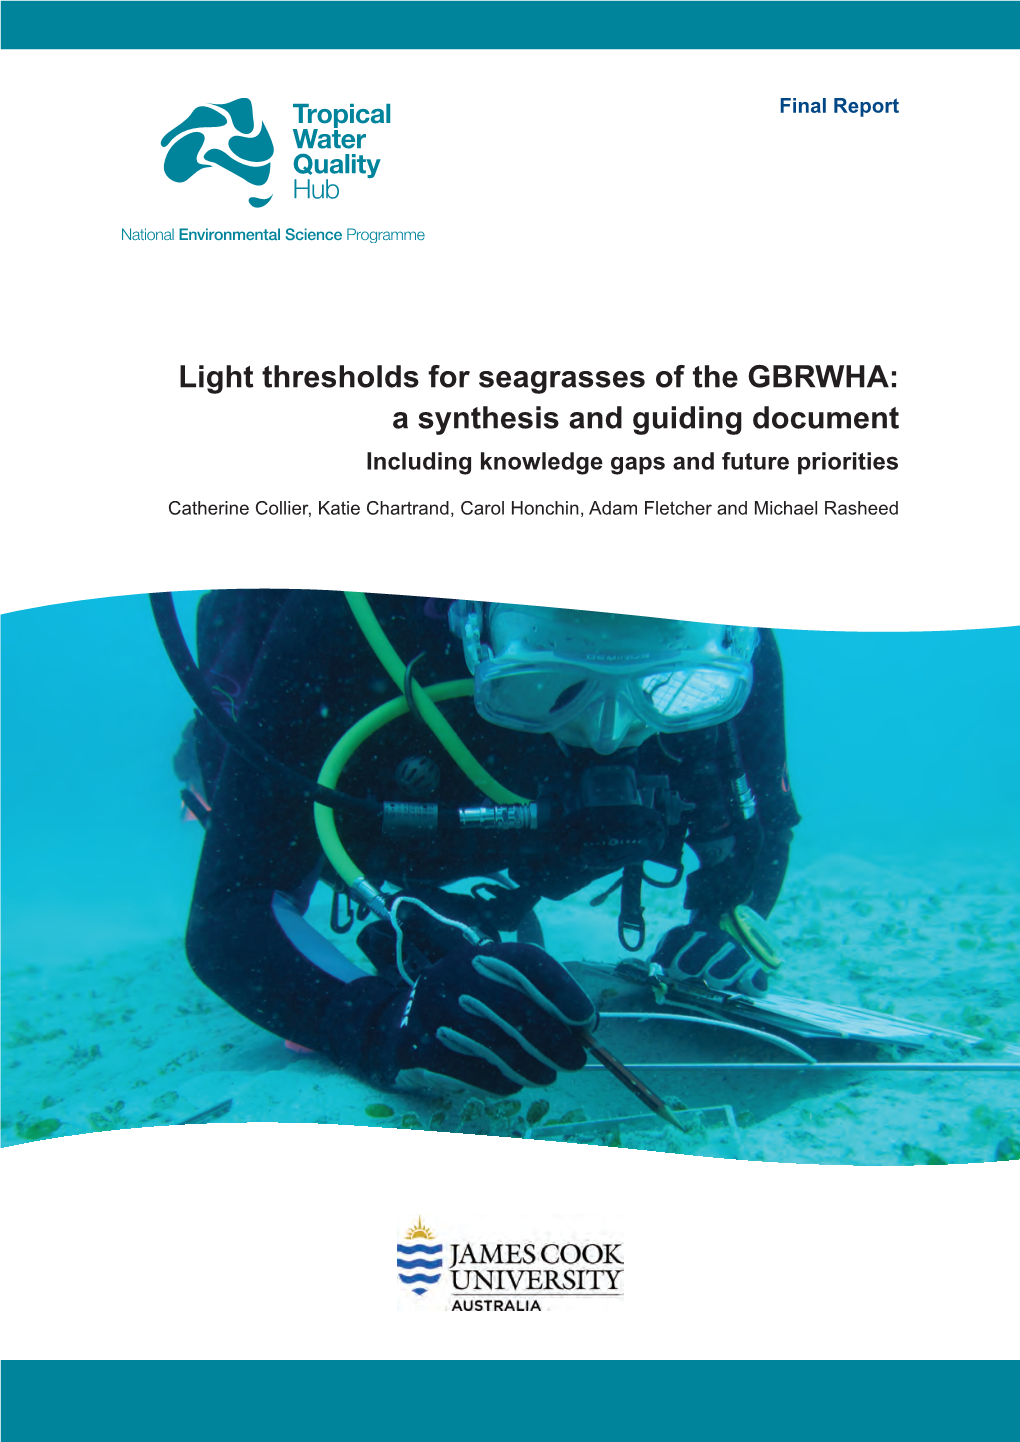 Light Thresholds for Seagrasses of the GBRWHA: a Synthesis and Guiding Document Including Knowledge Gaps and Future Priorities